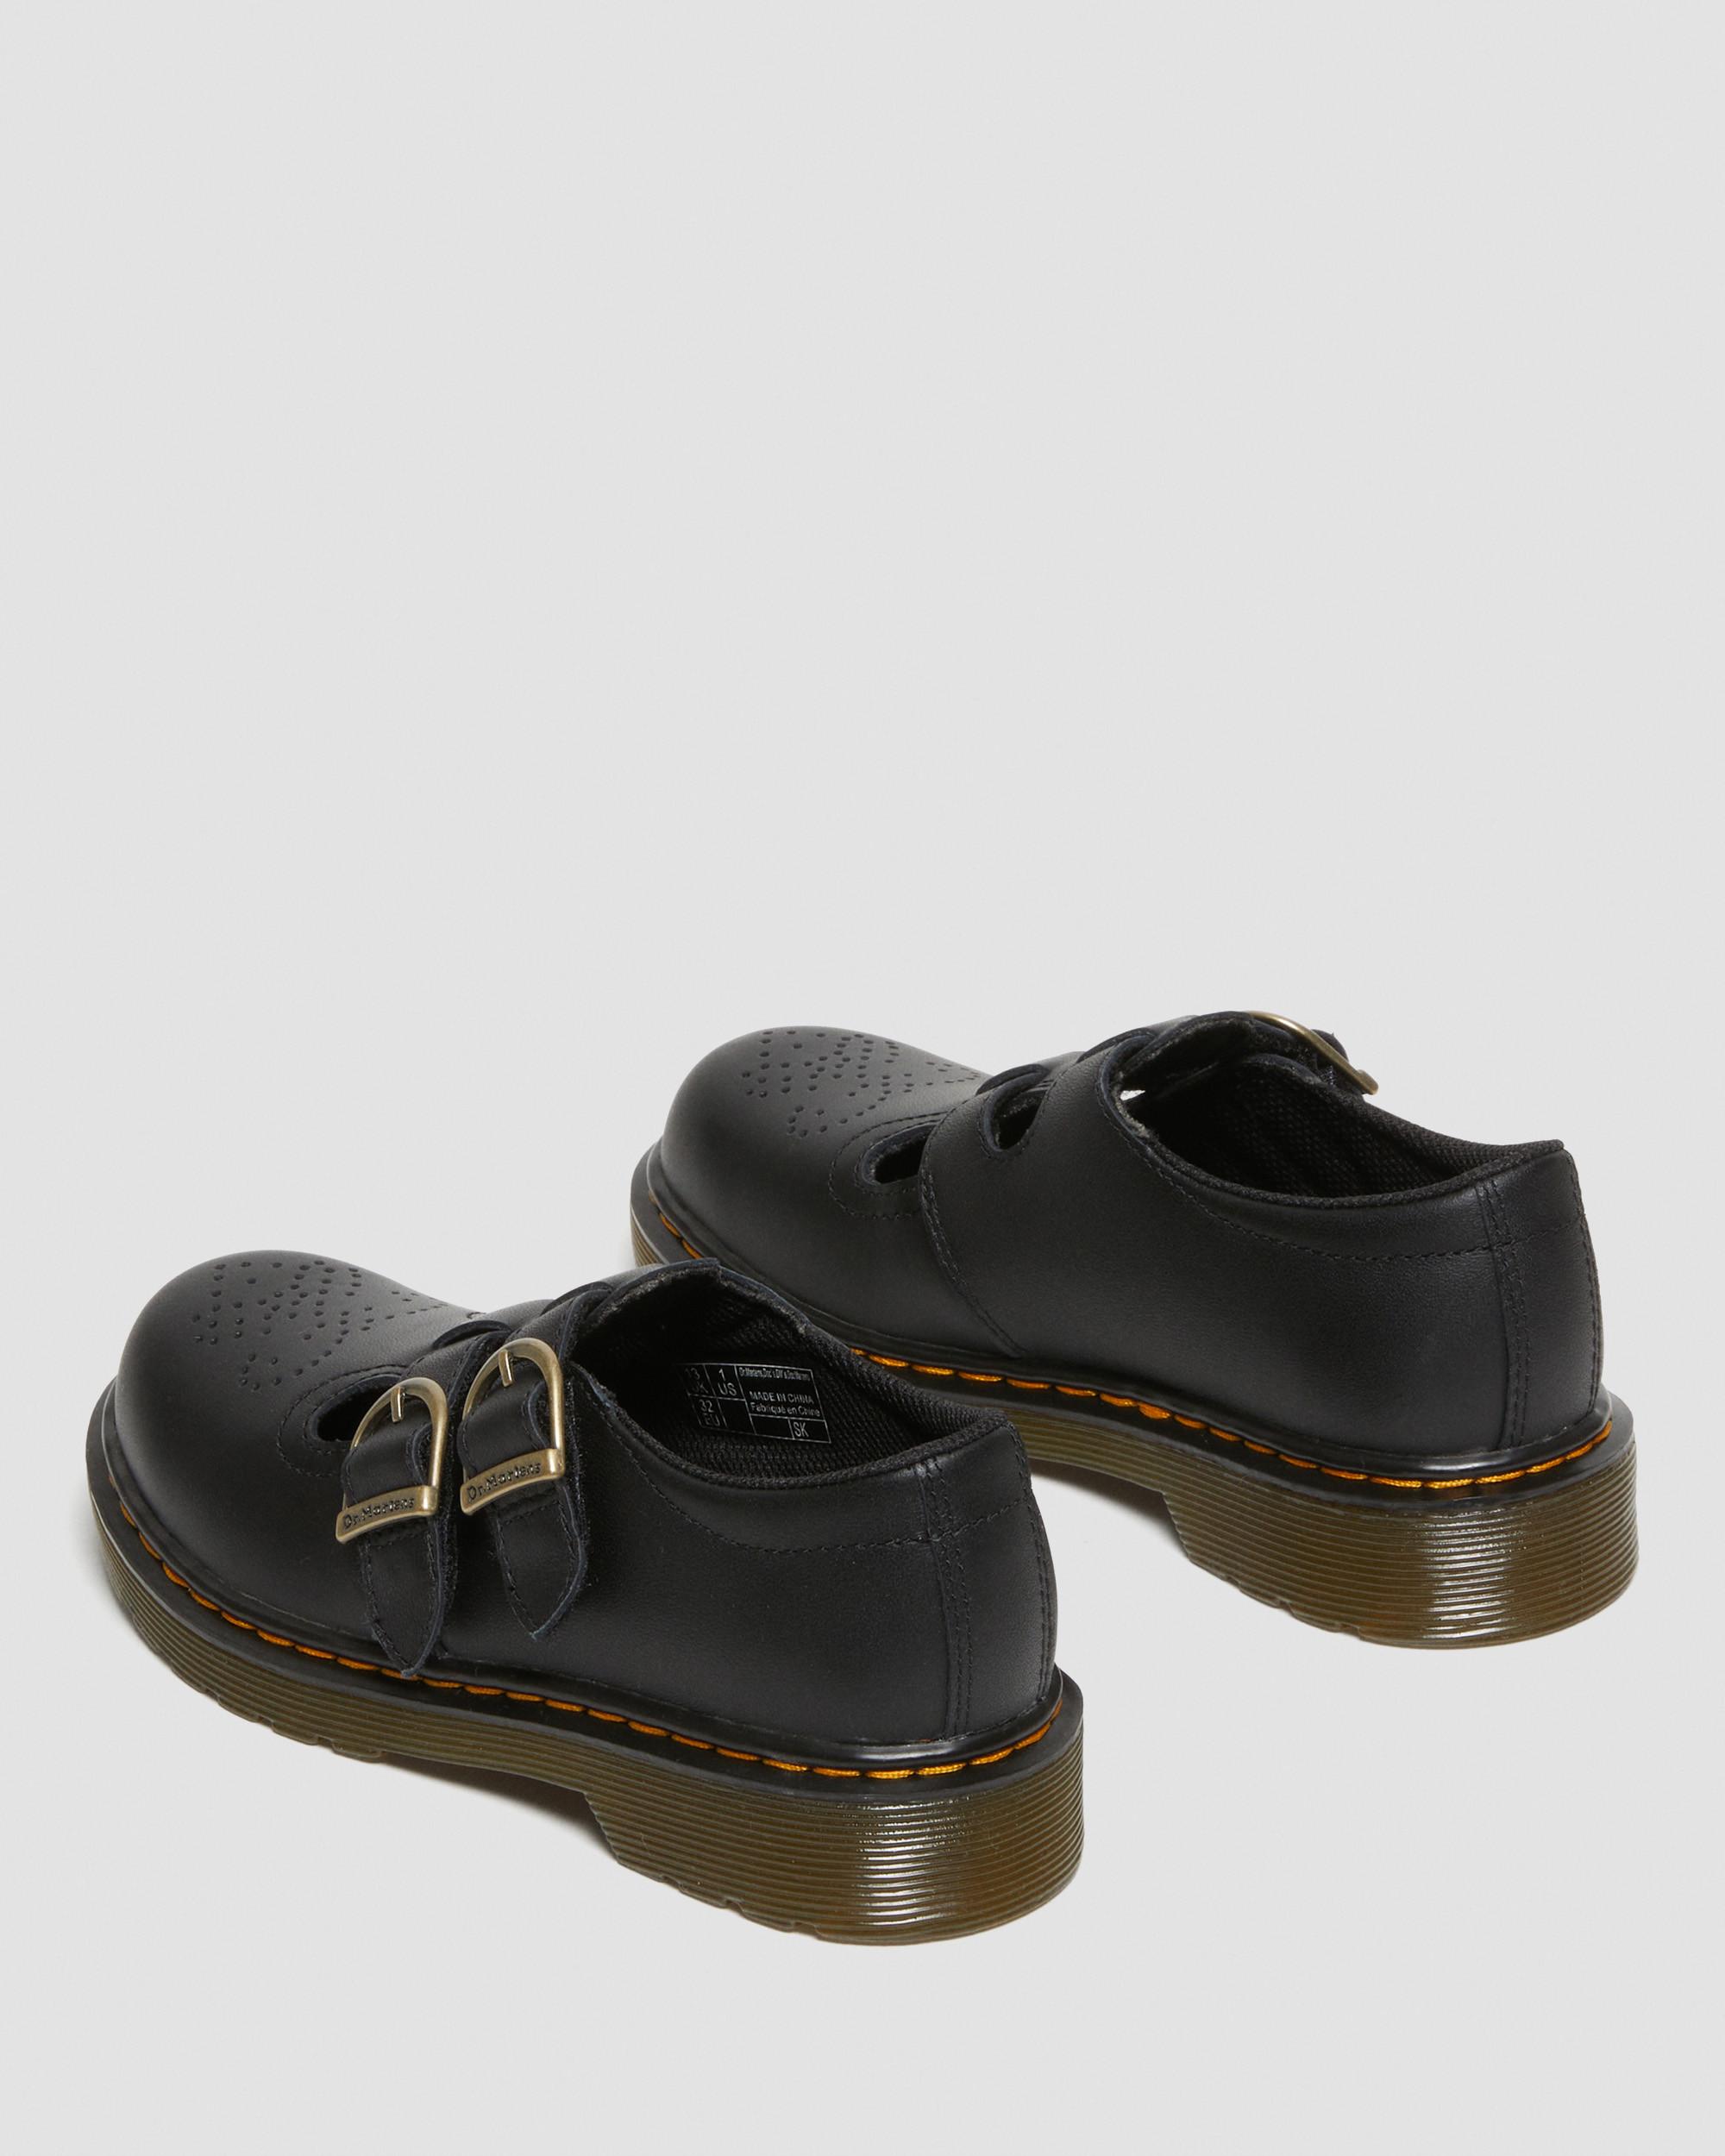 8065 Softy T Junior Leather Shoes